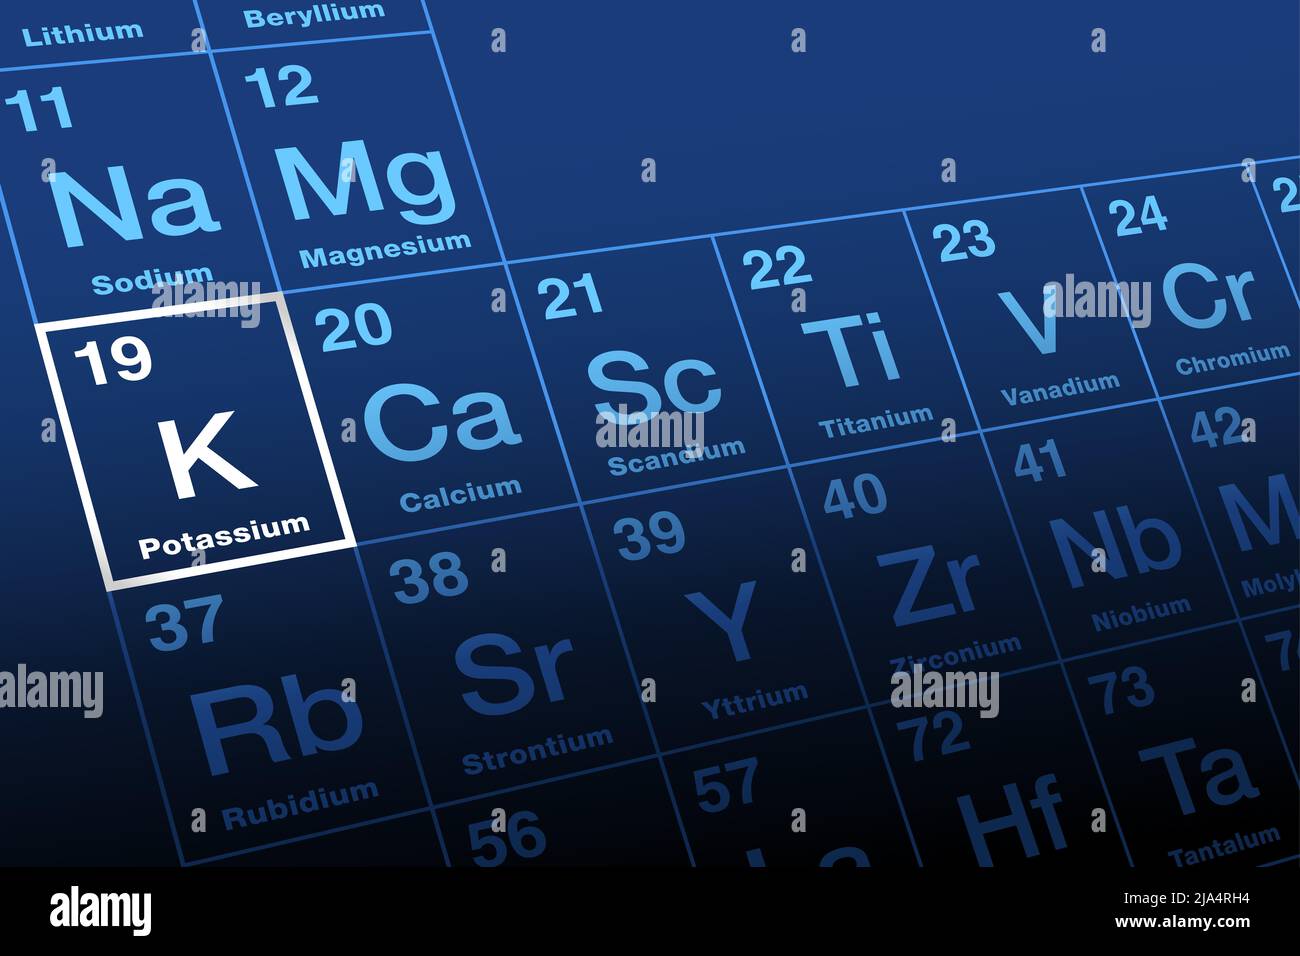 Potassium on periodic table of the elements. Alkali metal with symbol K from Neo-Latin kalium, and with atomic number 19. Stock Photo